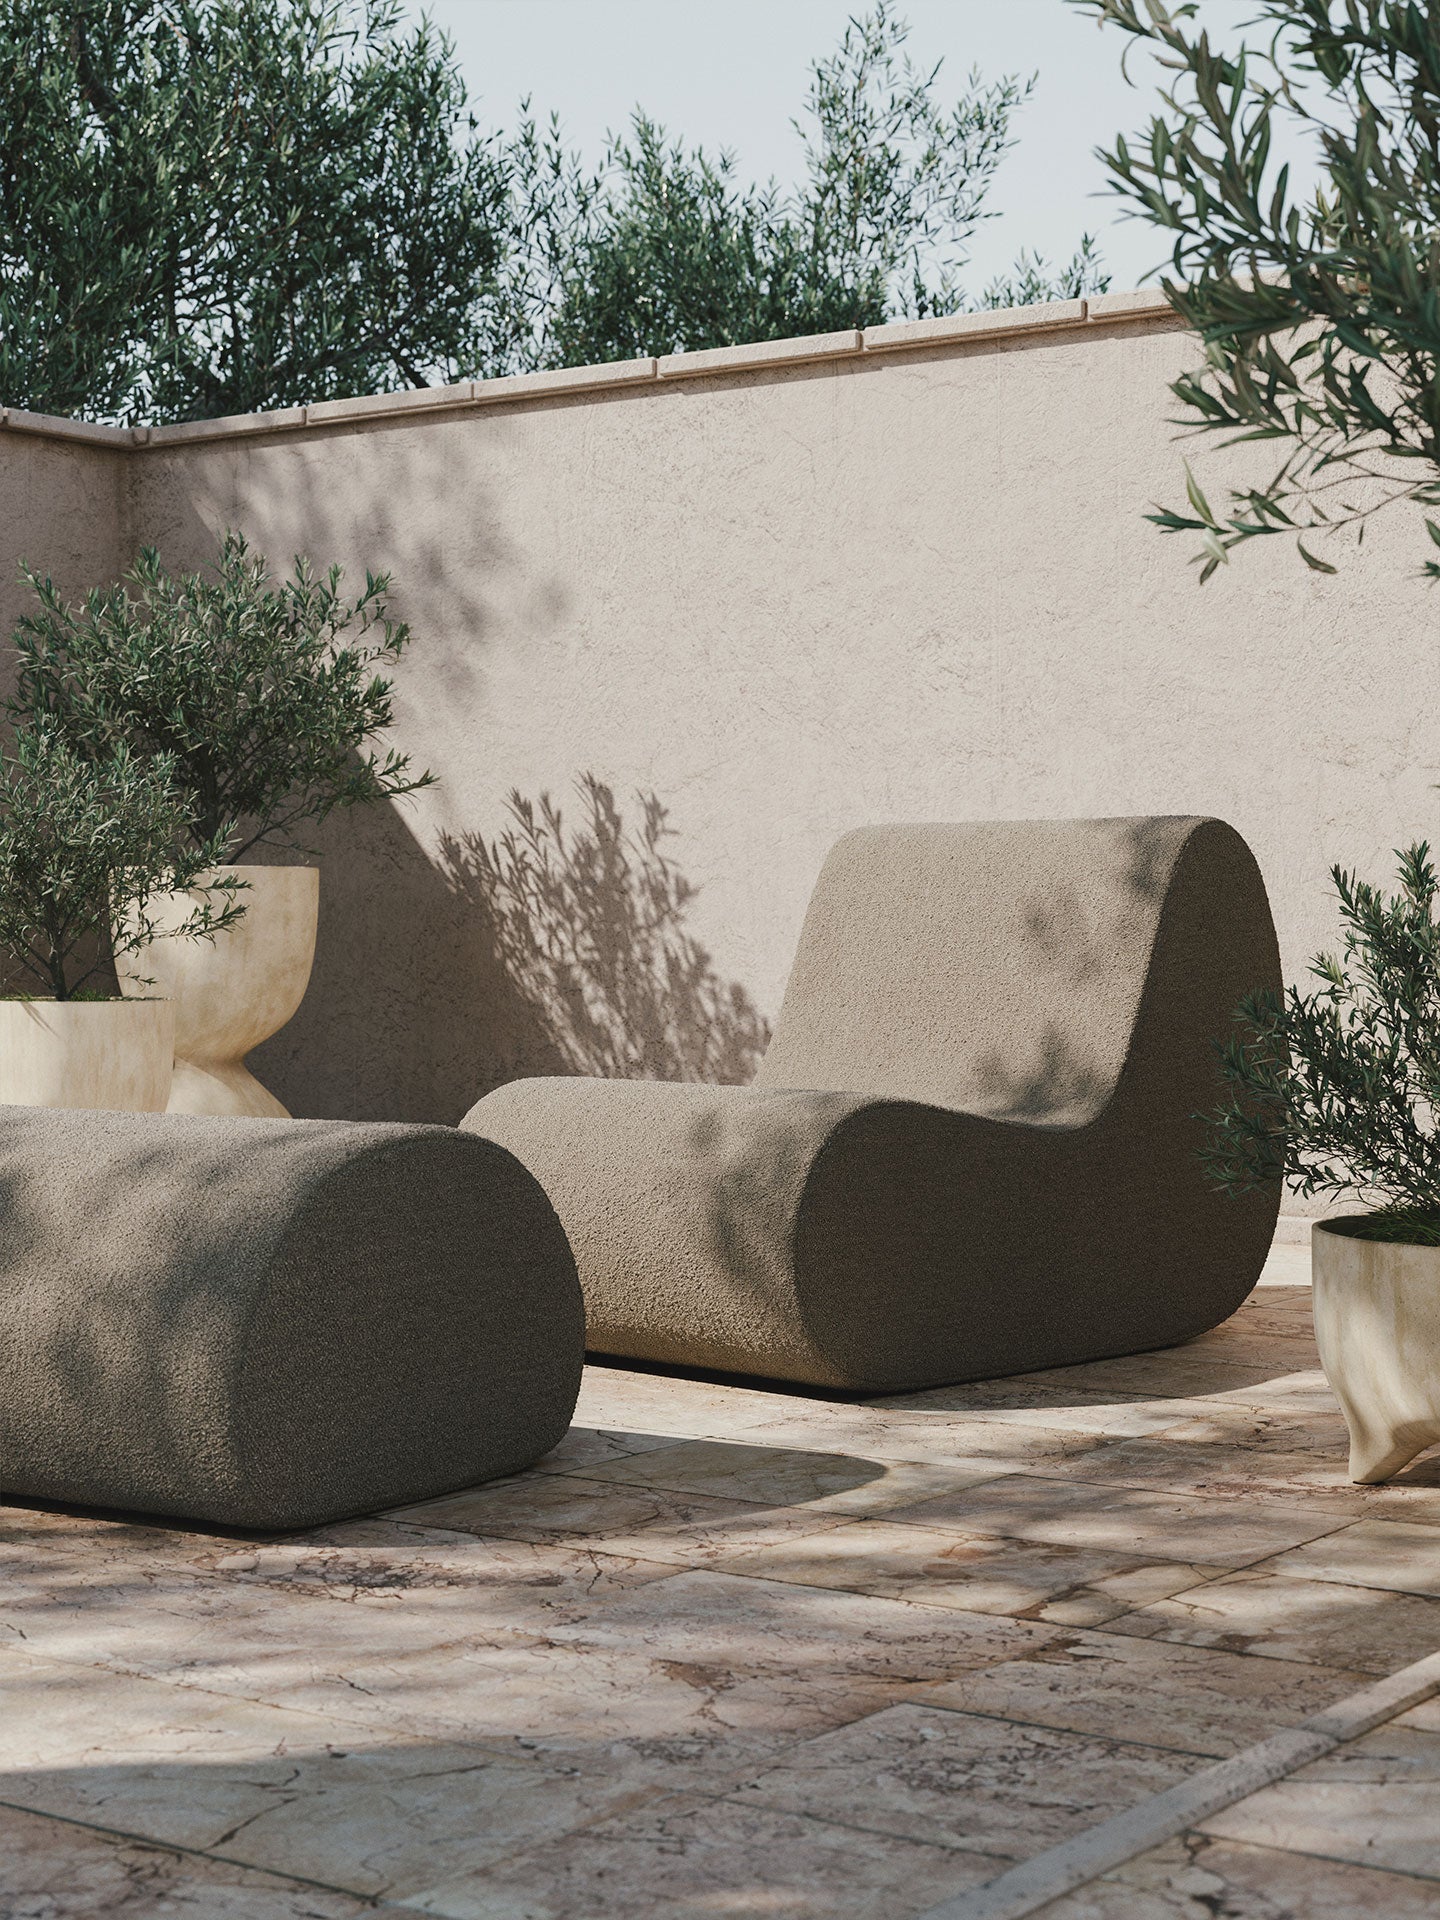 Rouli Outdoor Chair - More Options